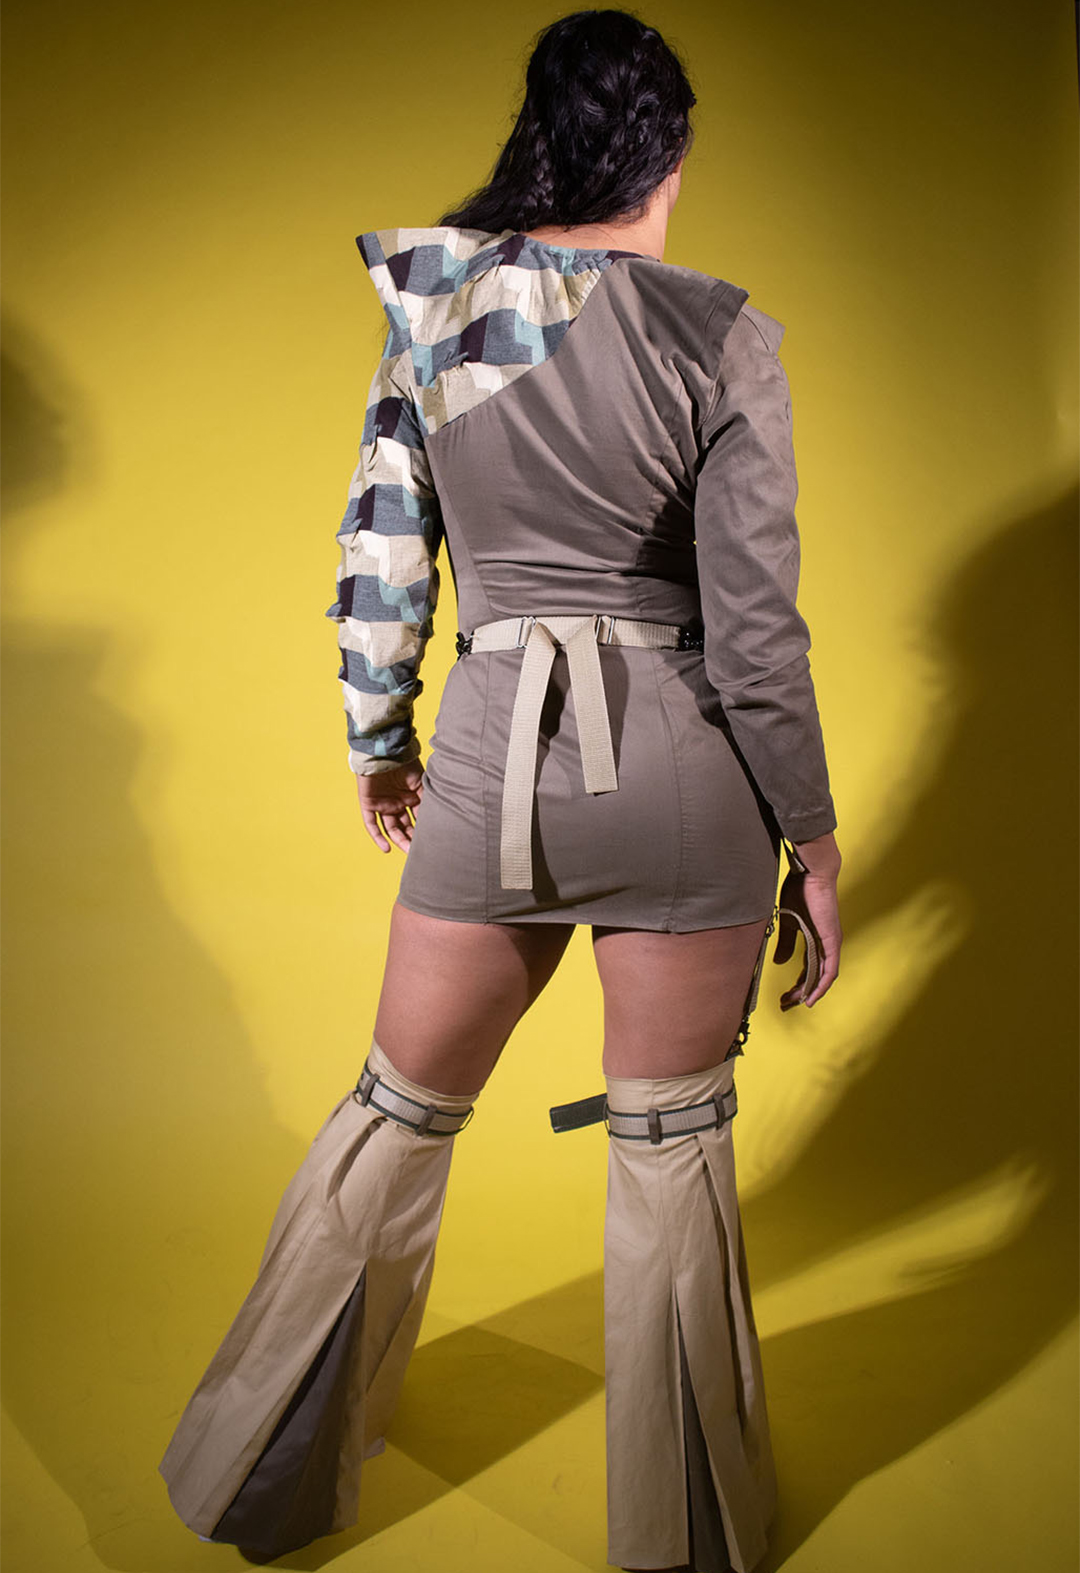 A young woman stands in a studio with a vivid yellow background, highlighting the back of her innovative attire. She dons a nightingale brown dress complemented by a turquoise color-blocked sleeve with pointy shoulders and pairs it with khaki skirt-style leg warmers for a daring and distinctive look.